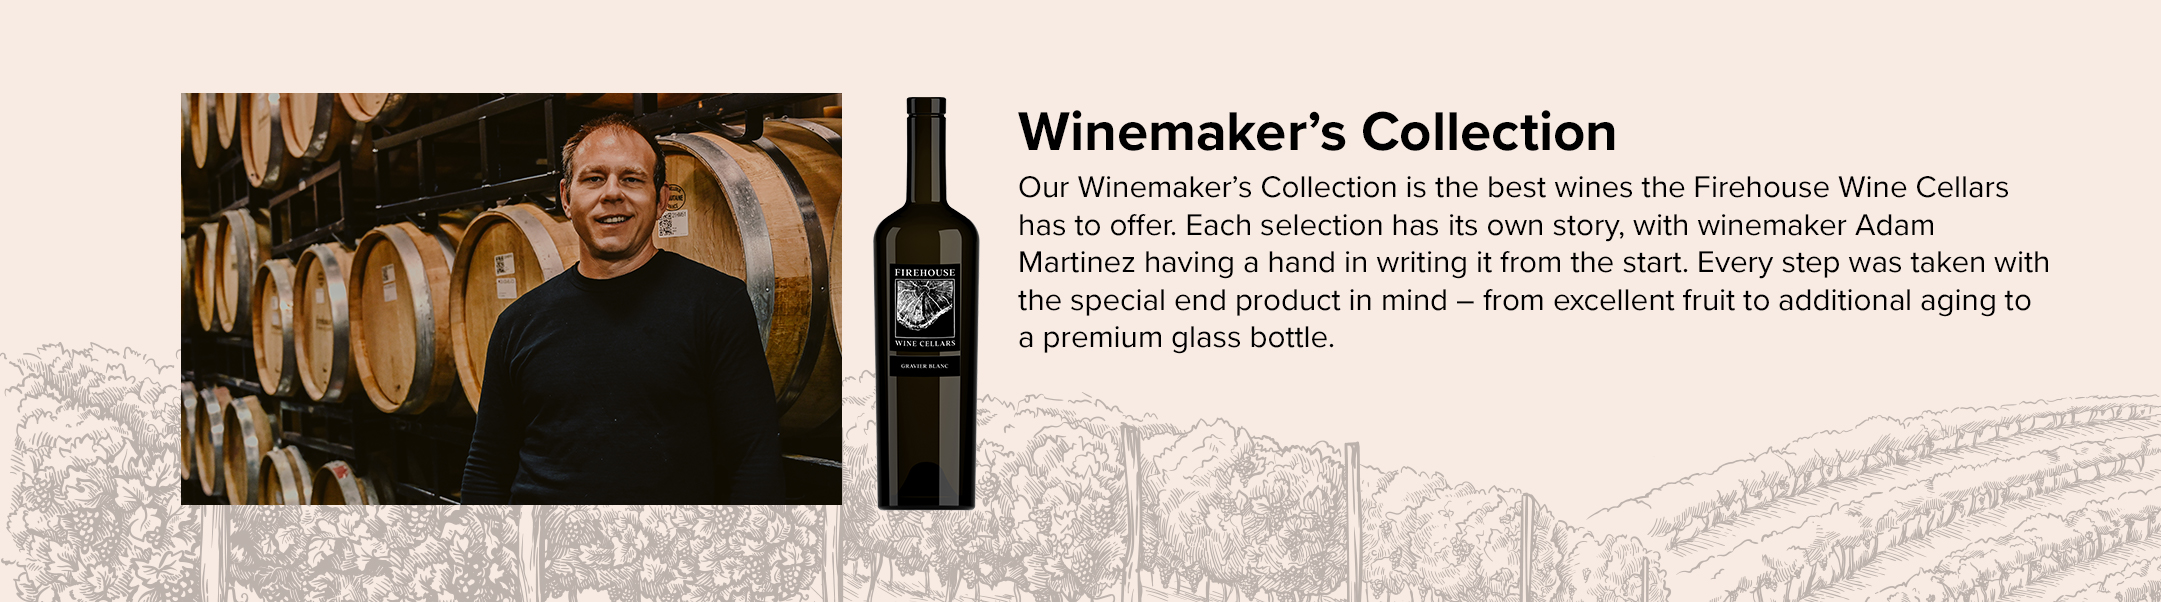 Firehouse Wine Cellars Winemaker's Collection